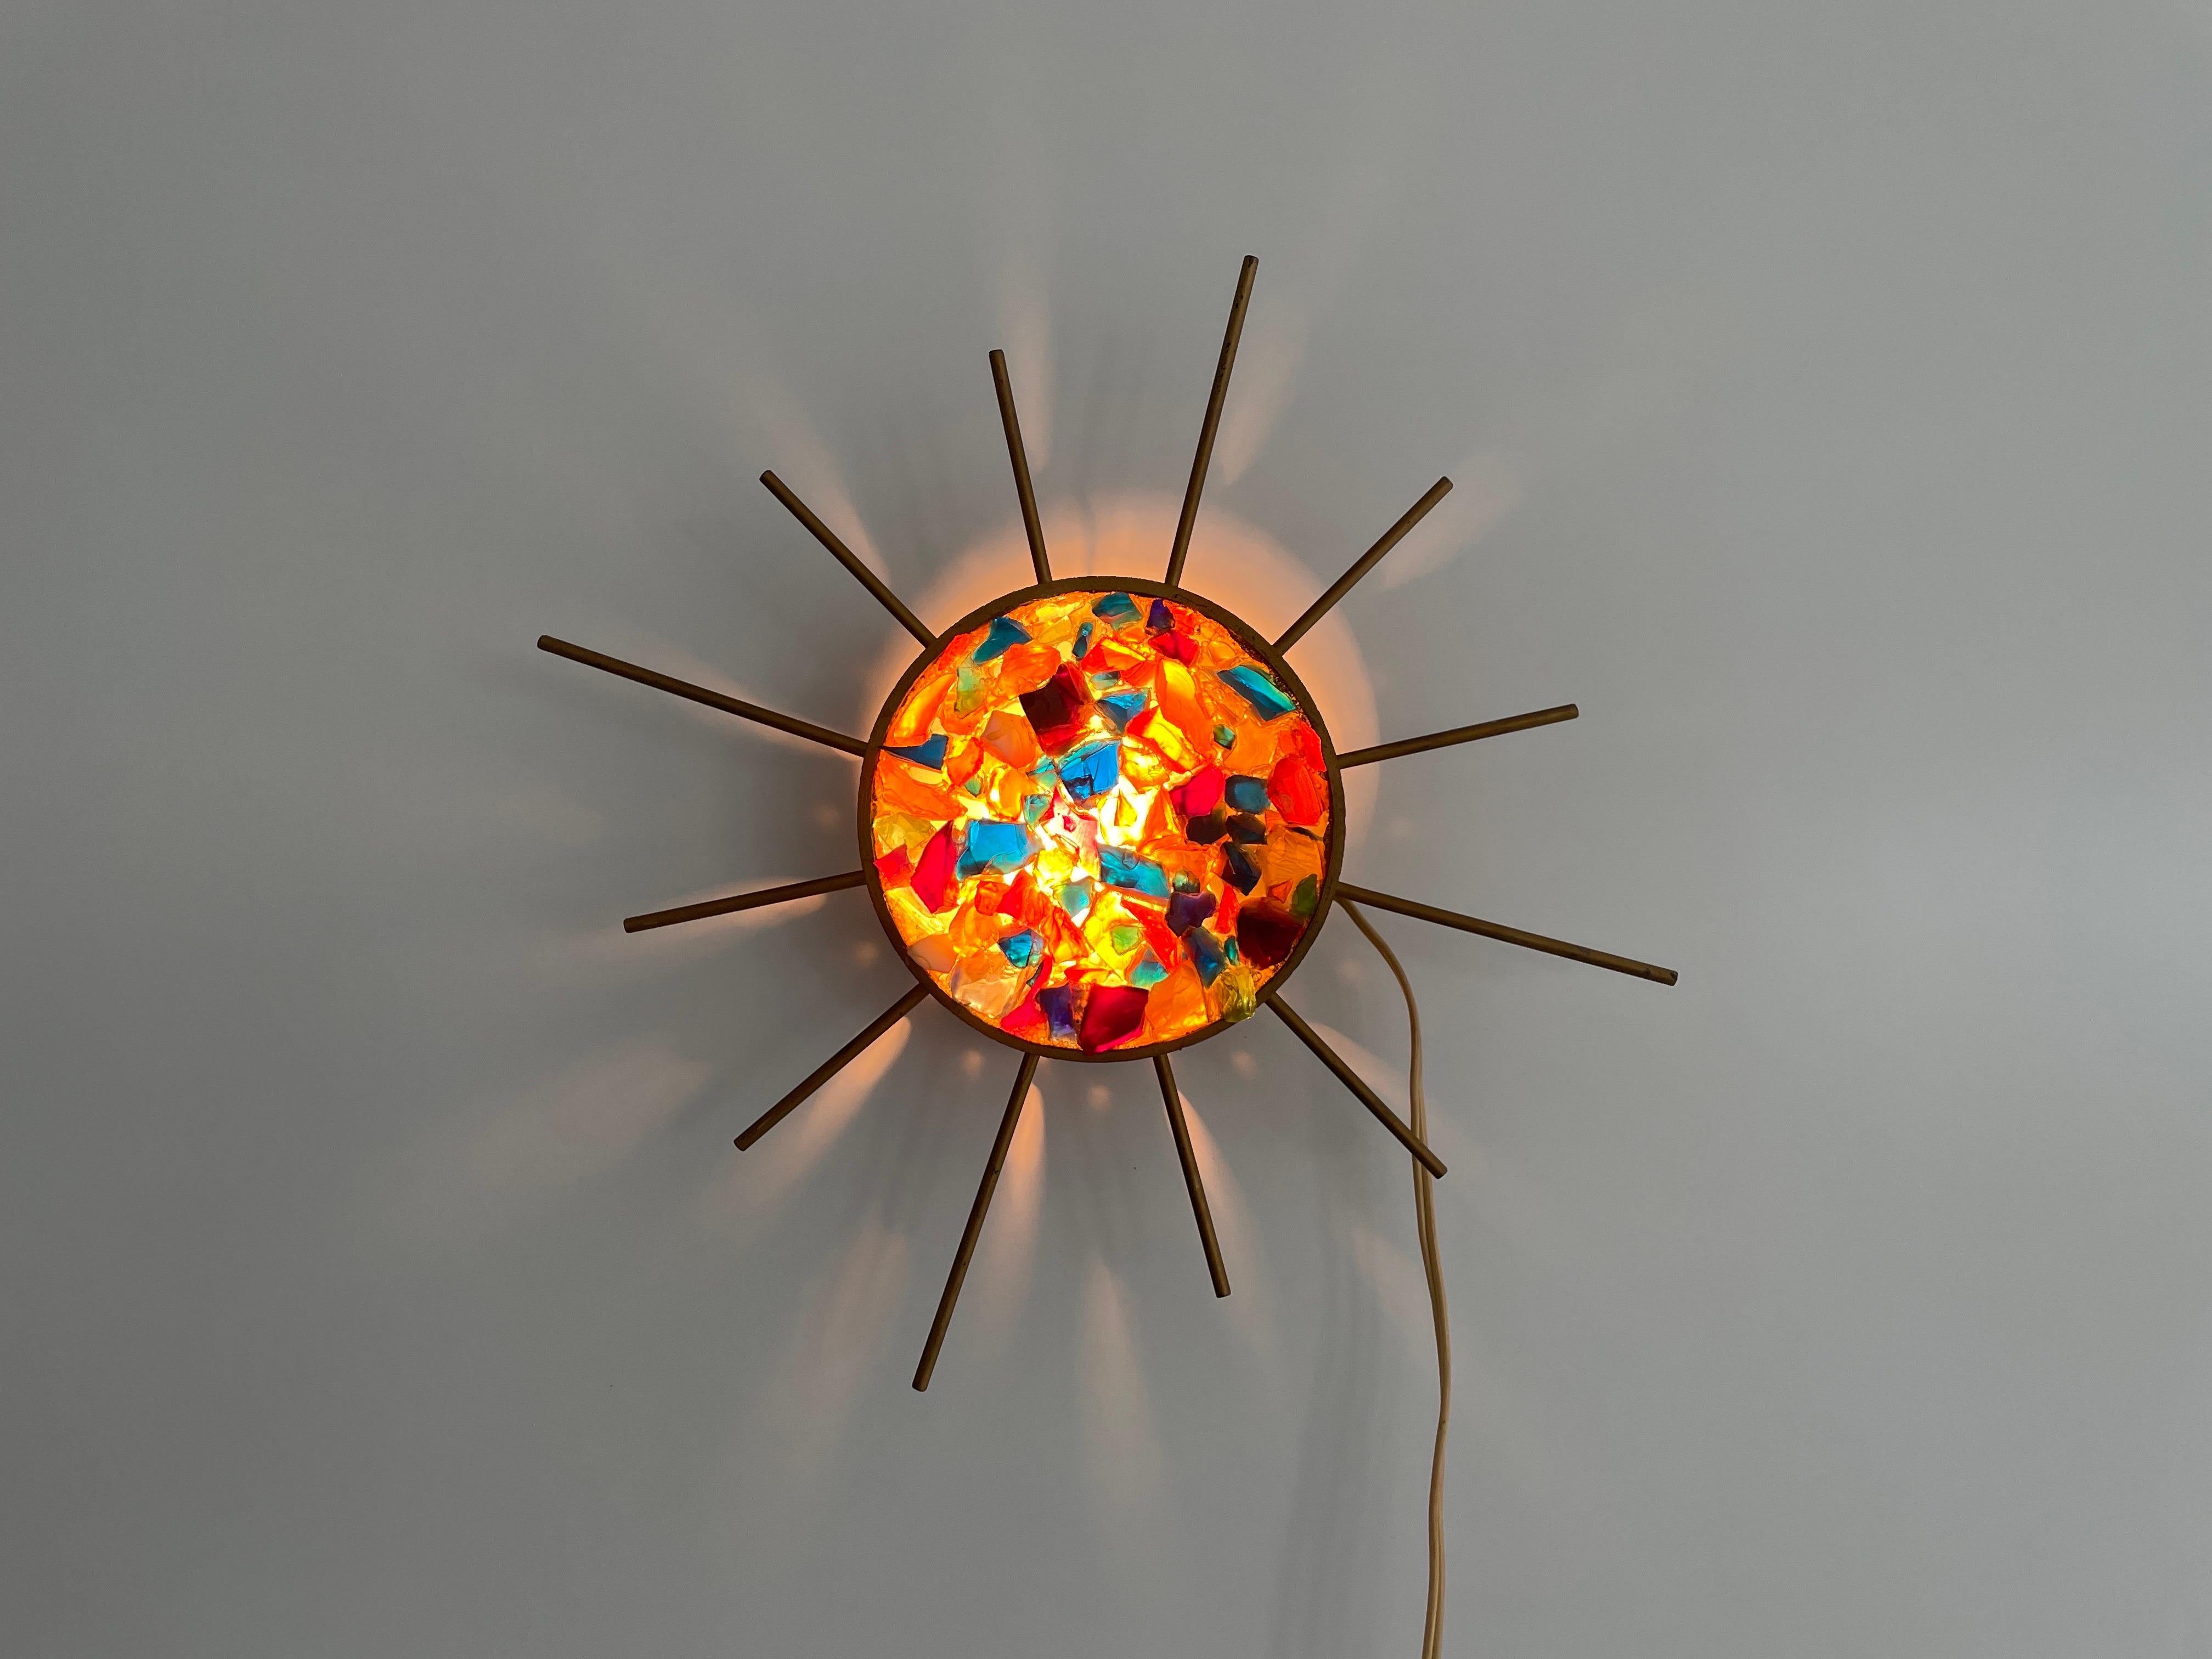 Metal Sunburst Design Colorful Glass Pieces in Stone Form Wall Lamp, 1960s, Germany For Sale